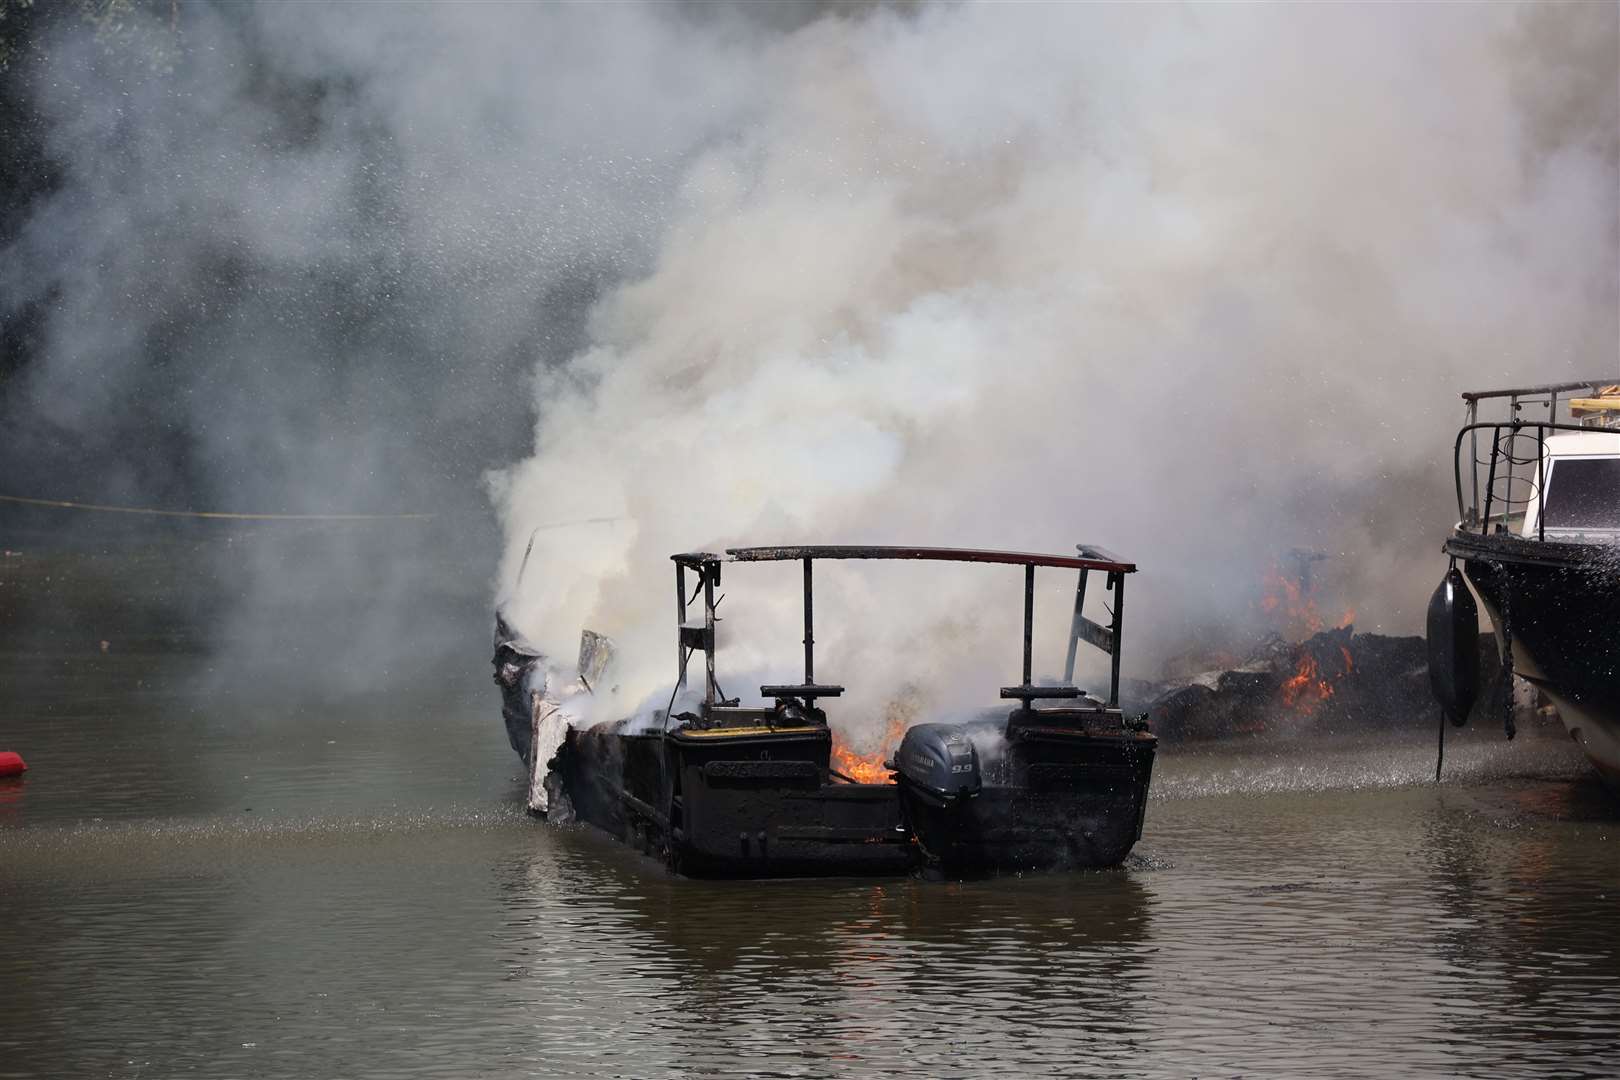 One of the boats destroyed during the blaze. Picture: Bernard Snell